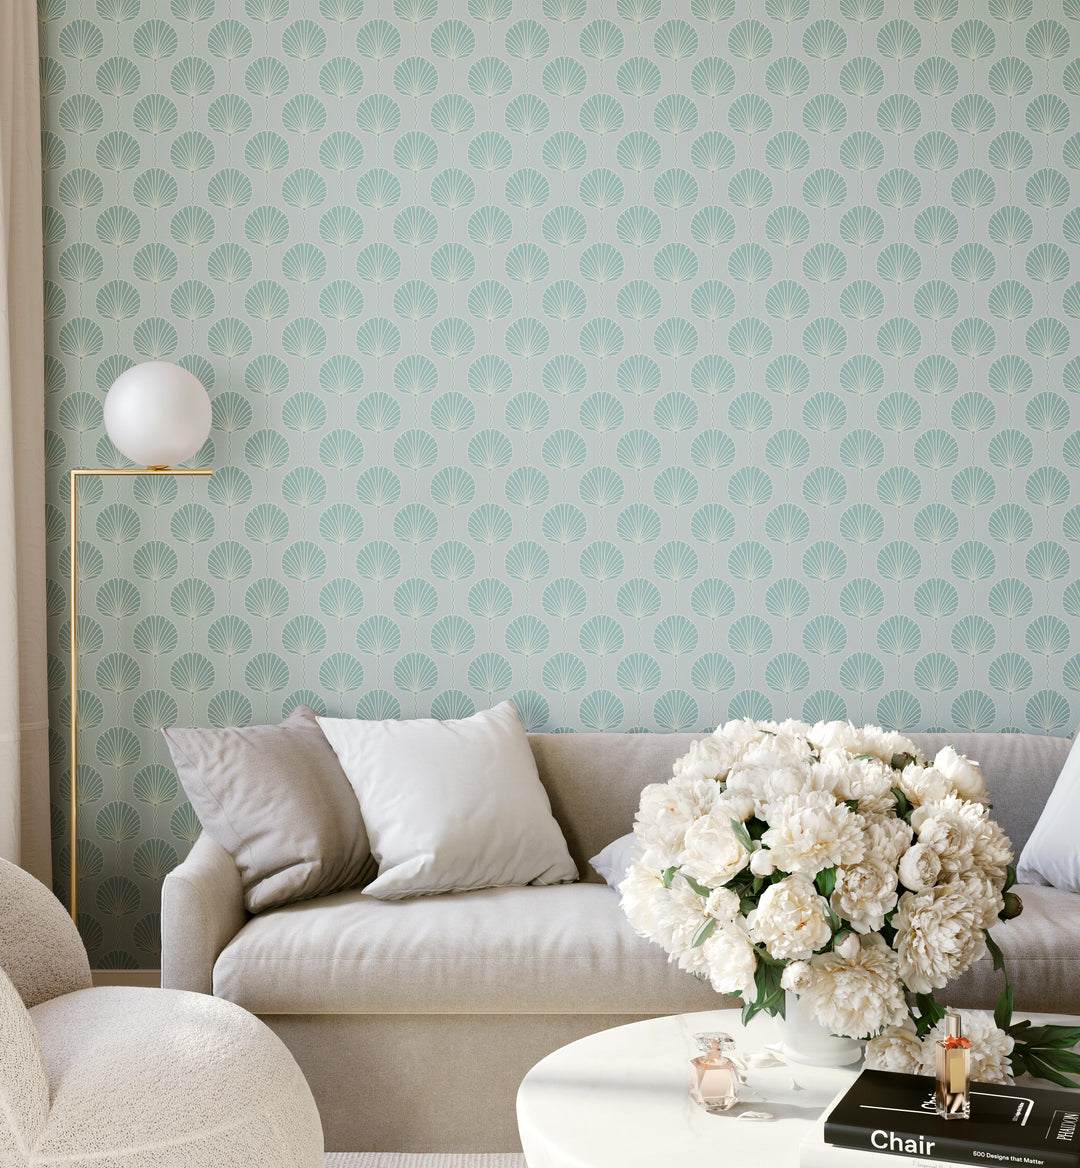 Deco Lily - Light Blue and Teal Wallpaper